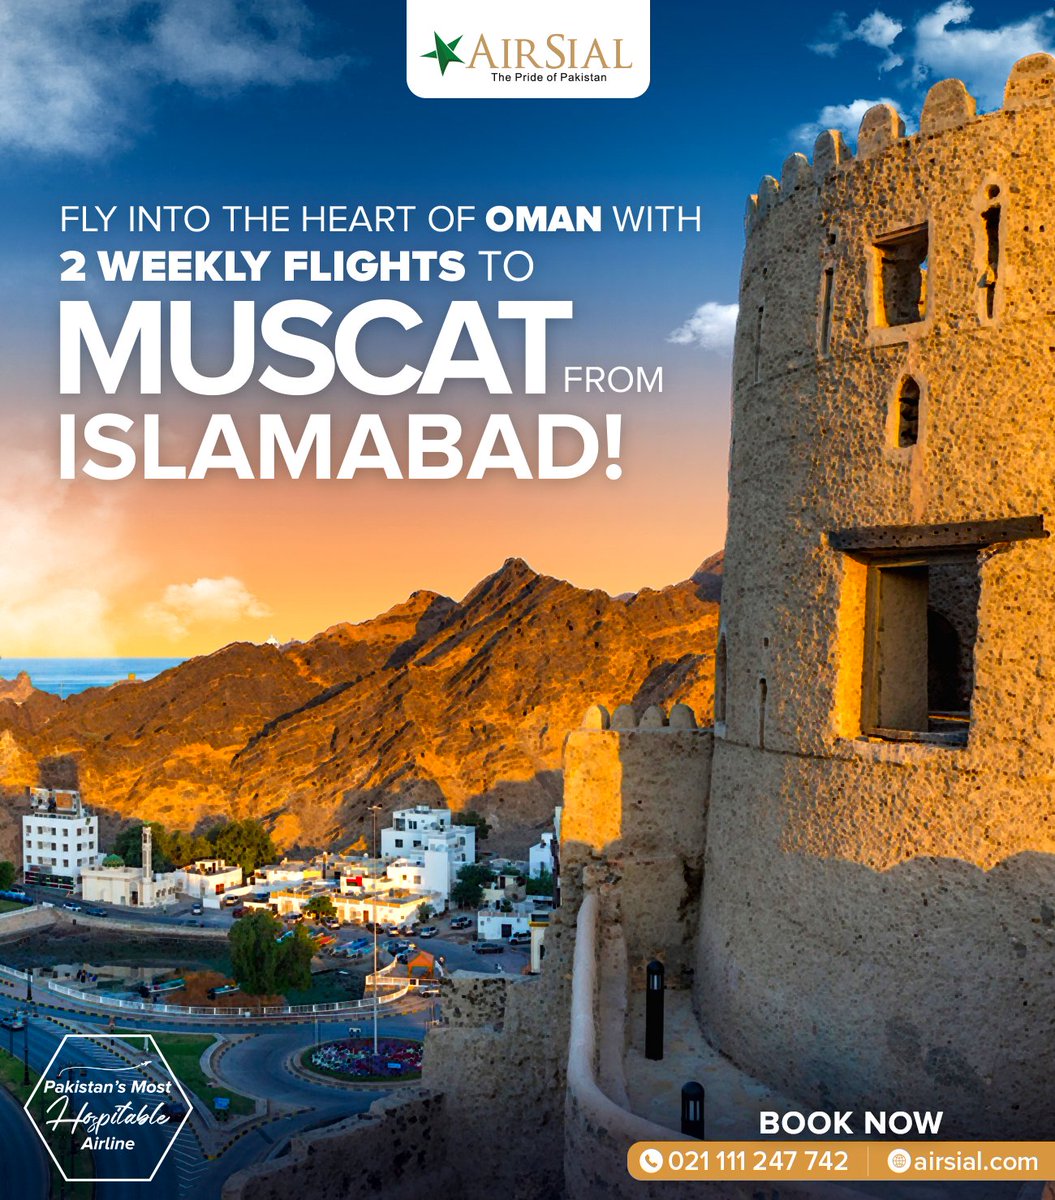 Fly into the heart of #Oman with 2 Weekly Flights between #Islamabad-#Muscat-Islamabad from 8th June onwards ✈️🇴🇲

Book your ticket now!

#AirSial - The Pride of #Pakistan #PakistansMostHospitableAirline`